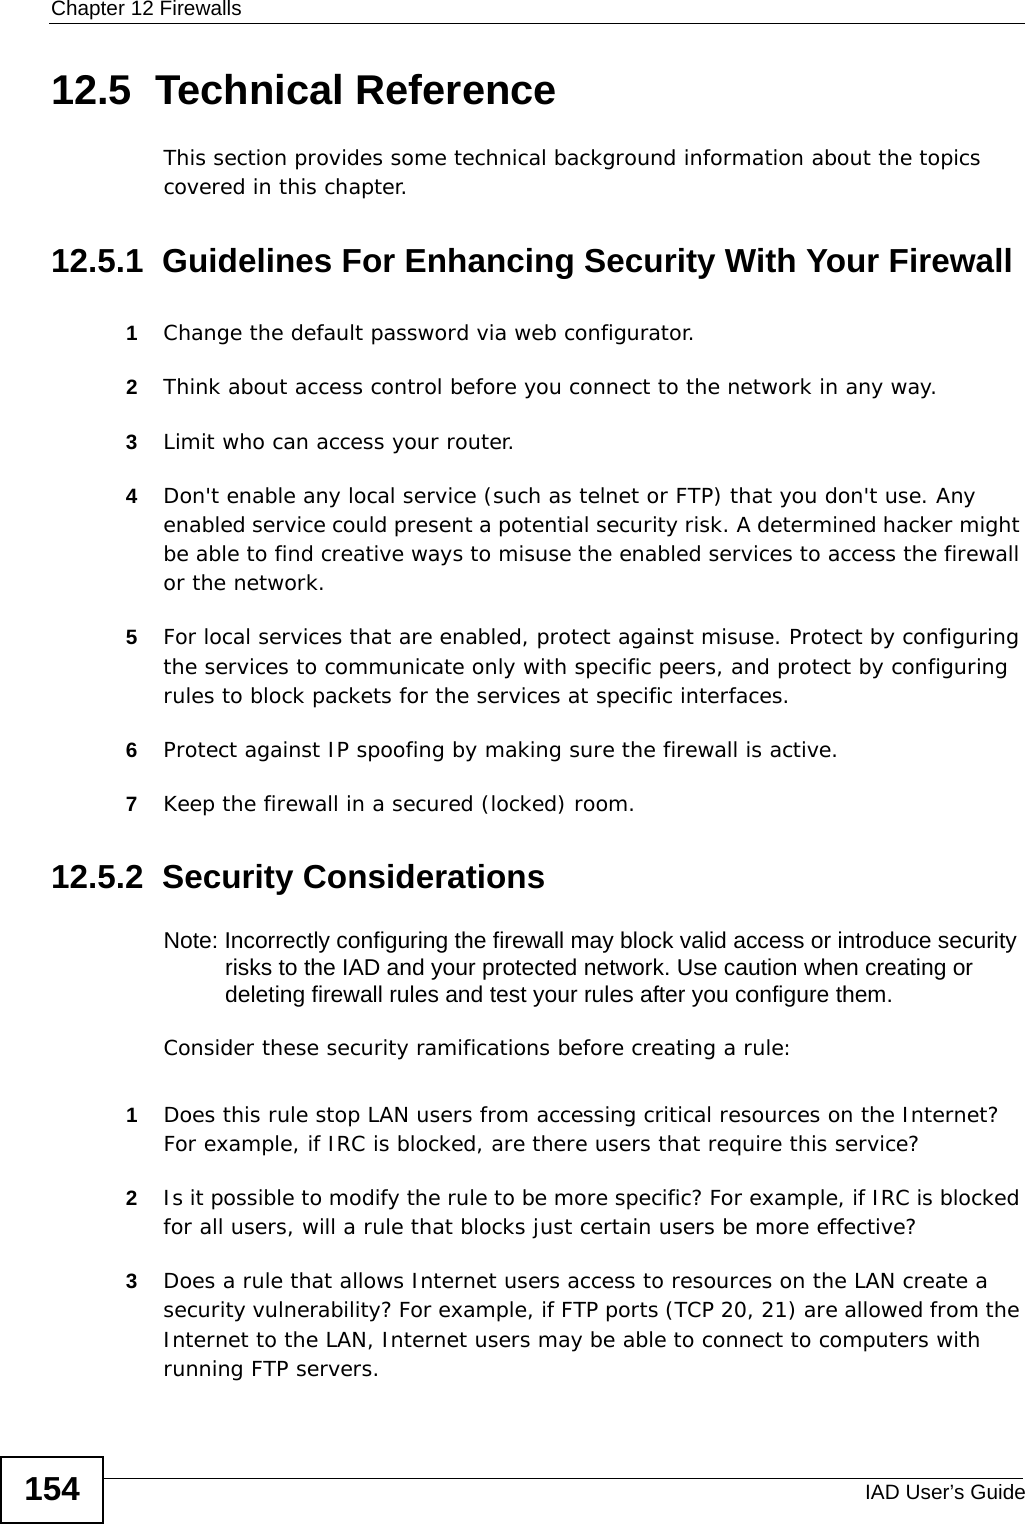 Chapter 12 FirewallsIAD User’s Guide15412.5  Technical ReferenceThis section provides some technical background information about the topics covered in this chapter.12.5.1  Guidelines For Enhancing Security With Your Firewall1Change the default password via web configurator.2Think about access control before you connect to the network in any way.3Limit who can access your router.4Don&apos;t enable any local service (such as telnet or FTP) that you don&apos;t use. Any enabled service could present a potential security risk. A determined hacker might be able to find creative ways to misuse the enabled services to access the firewall or the network.5For local services that are enabled, protect against misuse. Protect by configuring the services to communicate only with specific peers, and protect by configuring rules to block packets for the services at specific interfaces.6Protect against IP spoofing by making sure the firewall is active.7Keep the firewall in a secured (locked) room.12.5.2  Security ConsiderationsNote: Incorrectly configuring the firewall may block valid access or introduce security risks to the IAD and your protected network. Use caution when creating or deleting firewall rules and test your rules after you configure them.Consider these security ramifications before creating a rule:1Does this rule stop LAN users from accessing critical resources on the Internet? For example, if IRC is blocked, are there users that require this service?2Is it possible to modify the rule to be more specific? For example, if IRC is blocked for all users, will a rule that blocks just certain users be more effective?3Does a rule that allows Internet users access to resources on the LAN create a security vulnerability? For example, if FTP ports (TCP 20, 21) are allowed from the Internet to the LAN, Internet users may be able to connect to computers with running FTP servers.